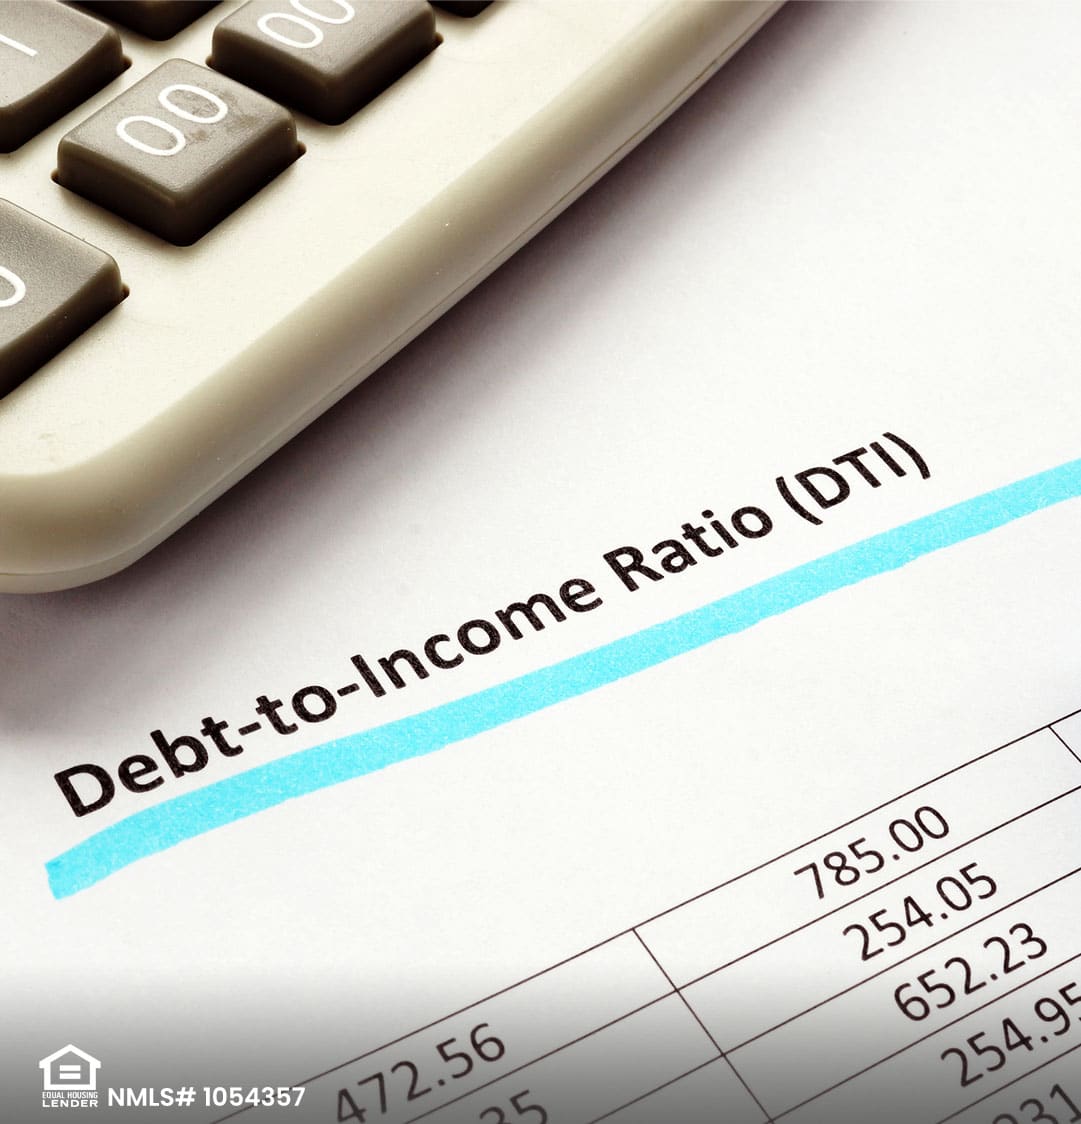 What Is Debt to Income Ratio?